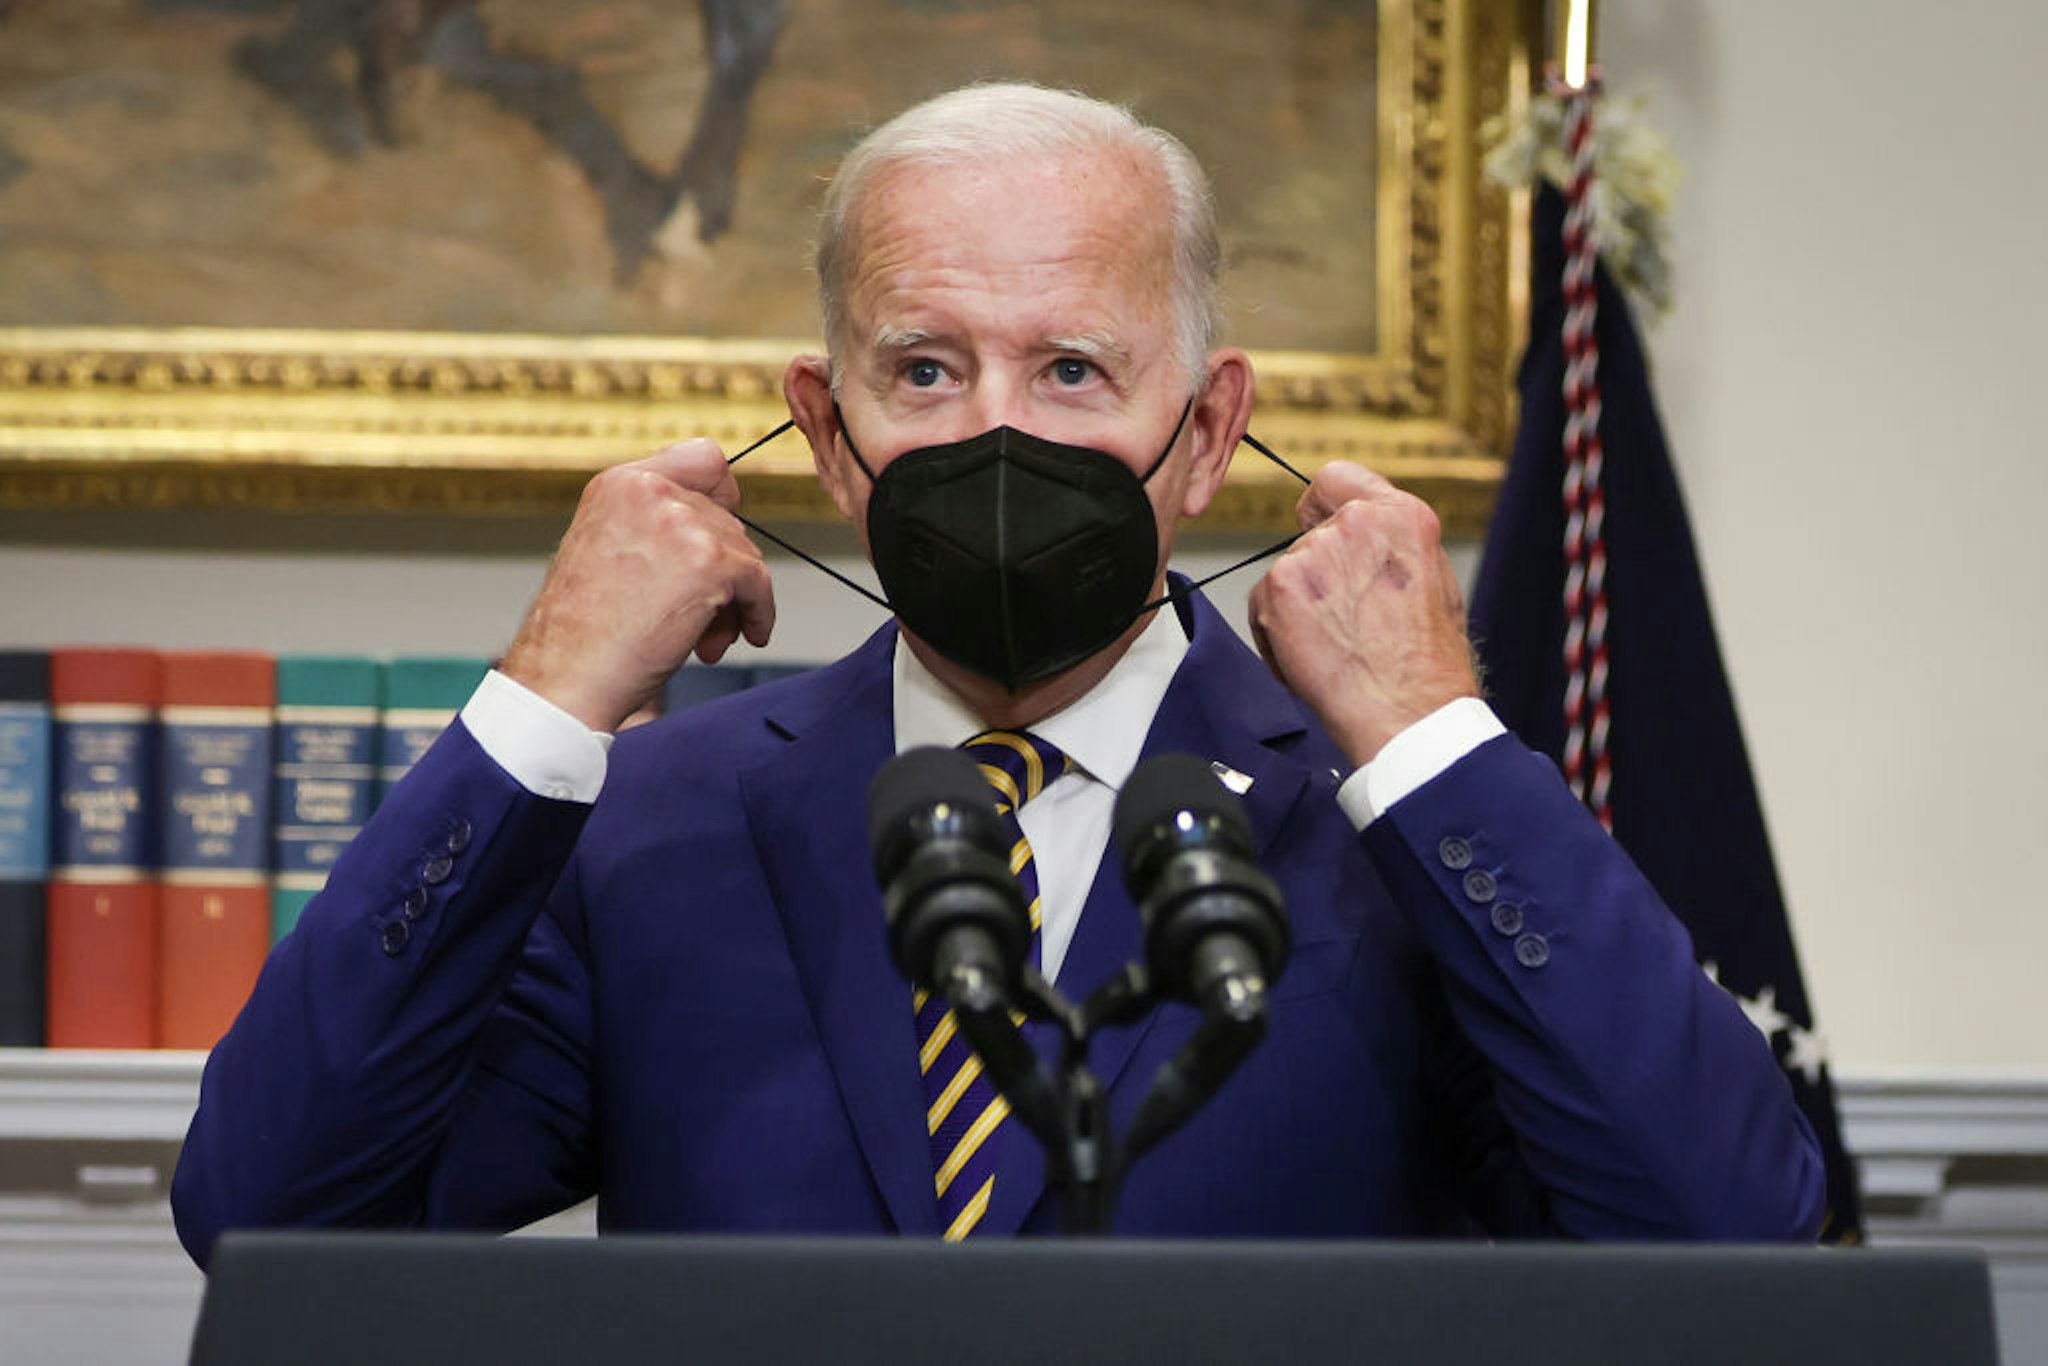 WASHINGTON, DC - AUGUST 24: U.S. President Joe Biden removes his mask before speaking on student loan debt in the Roosevelt Room of the White House August 24, 2022 in Washington, DC. President Biden announced steps to forgive $10,000 in student loan debt for borrowers who make less than $125,000 per year and cap payments at 5 percent of monthly income.